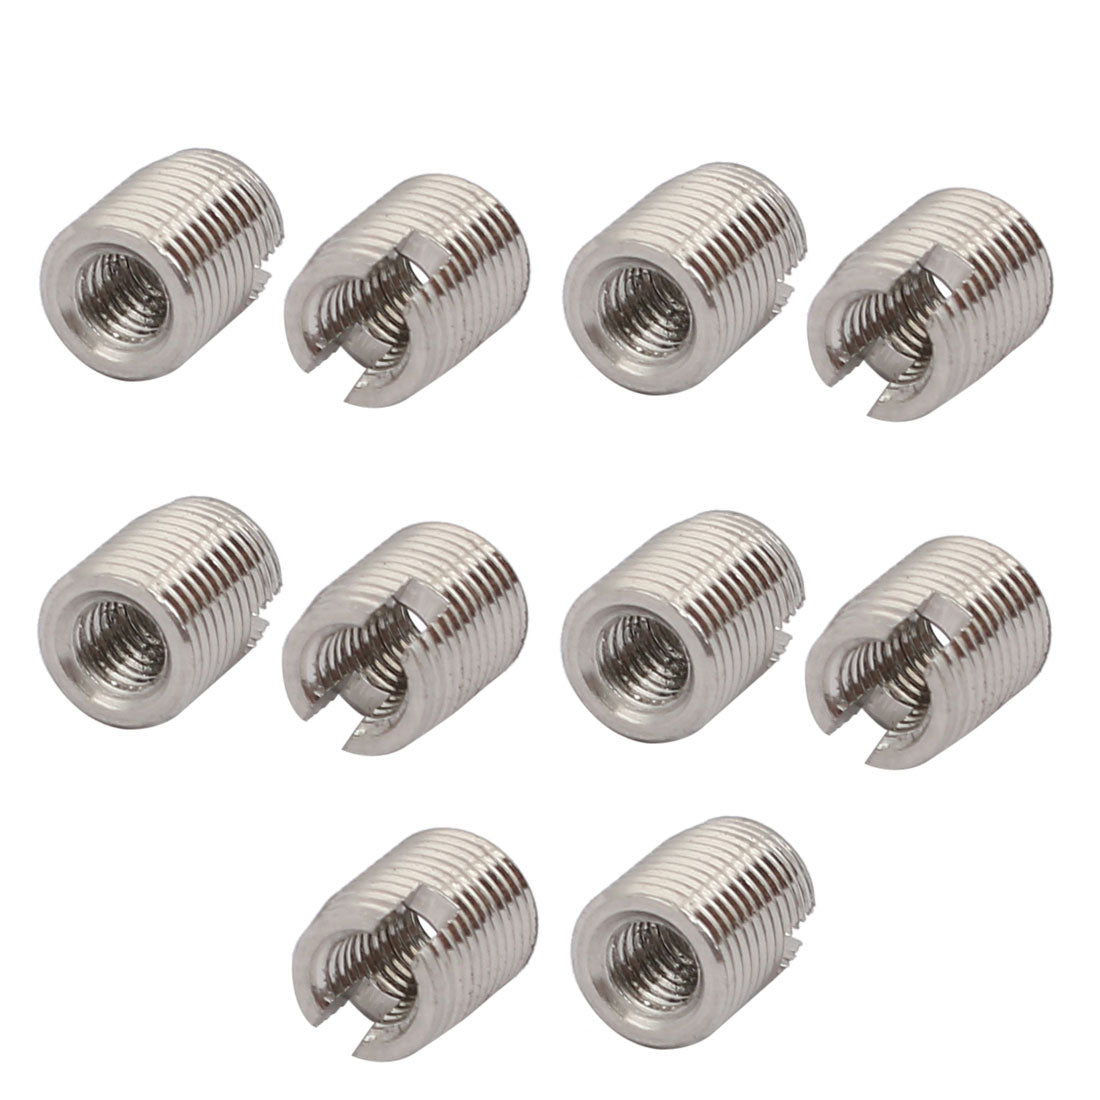 uxcell Uxcell M3x6mm 304 Stainless Steel Self Tapping Slotted Thread Insert 10pcs